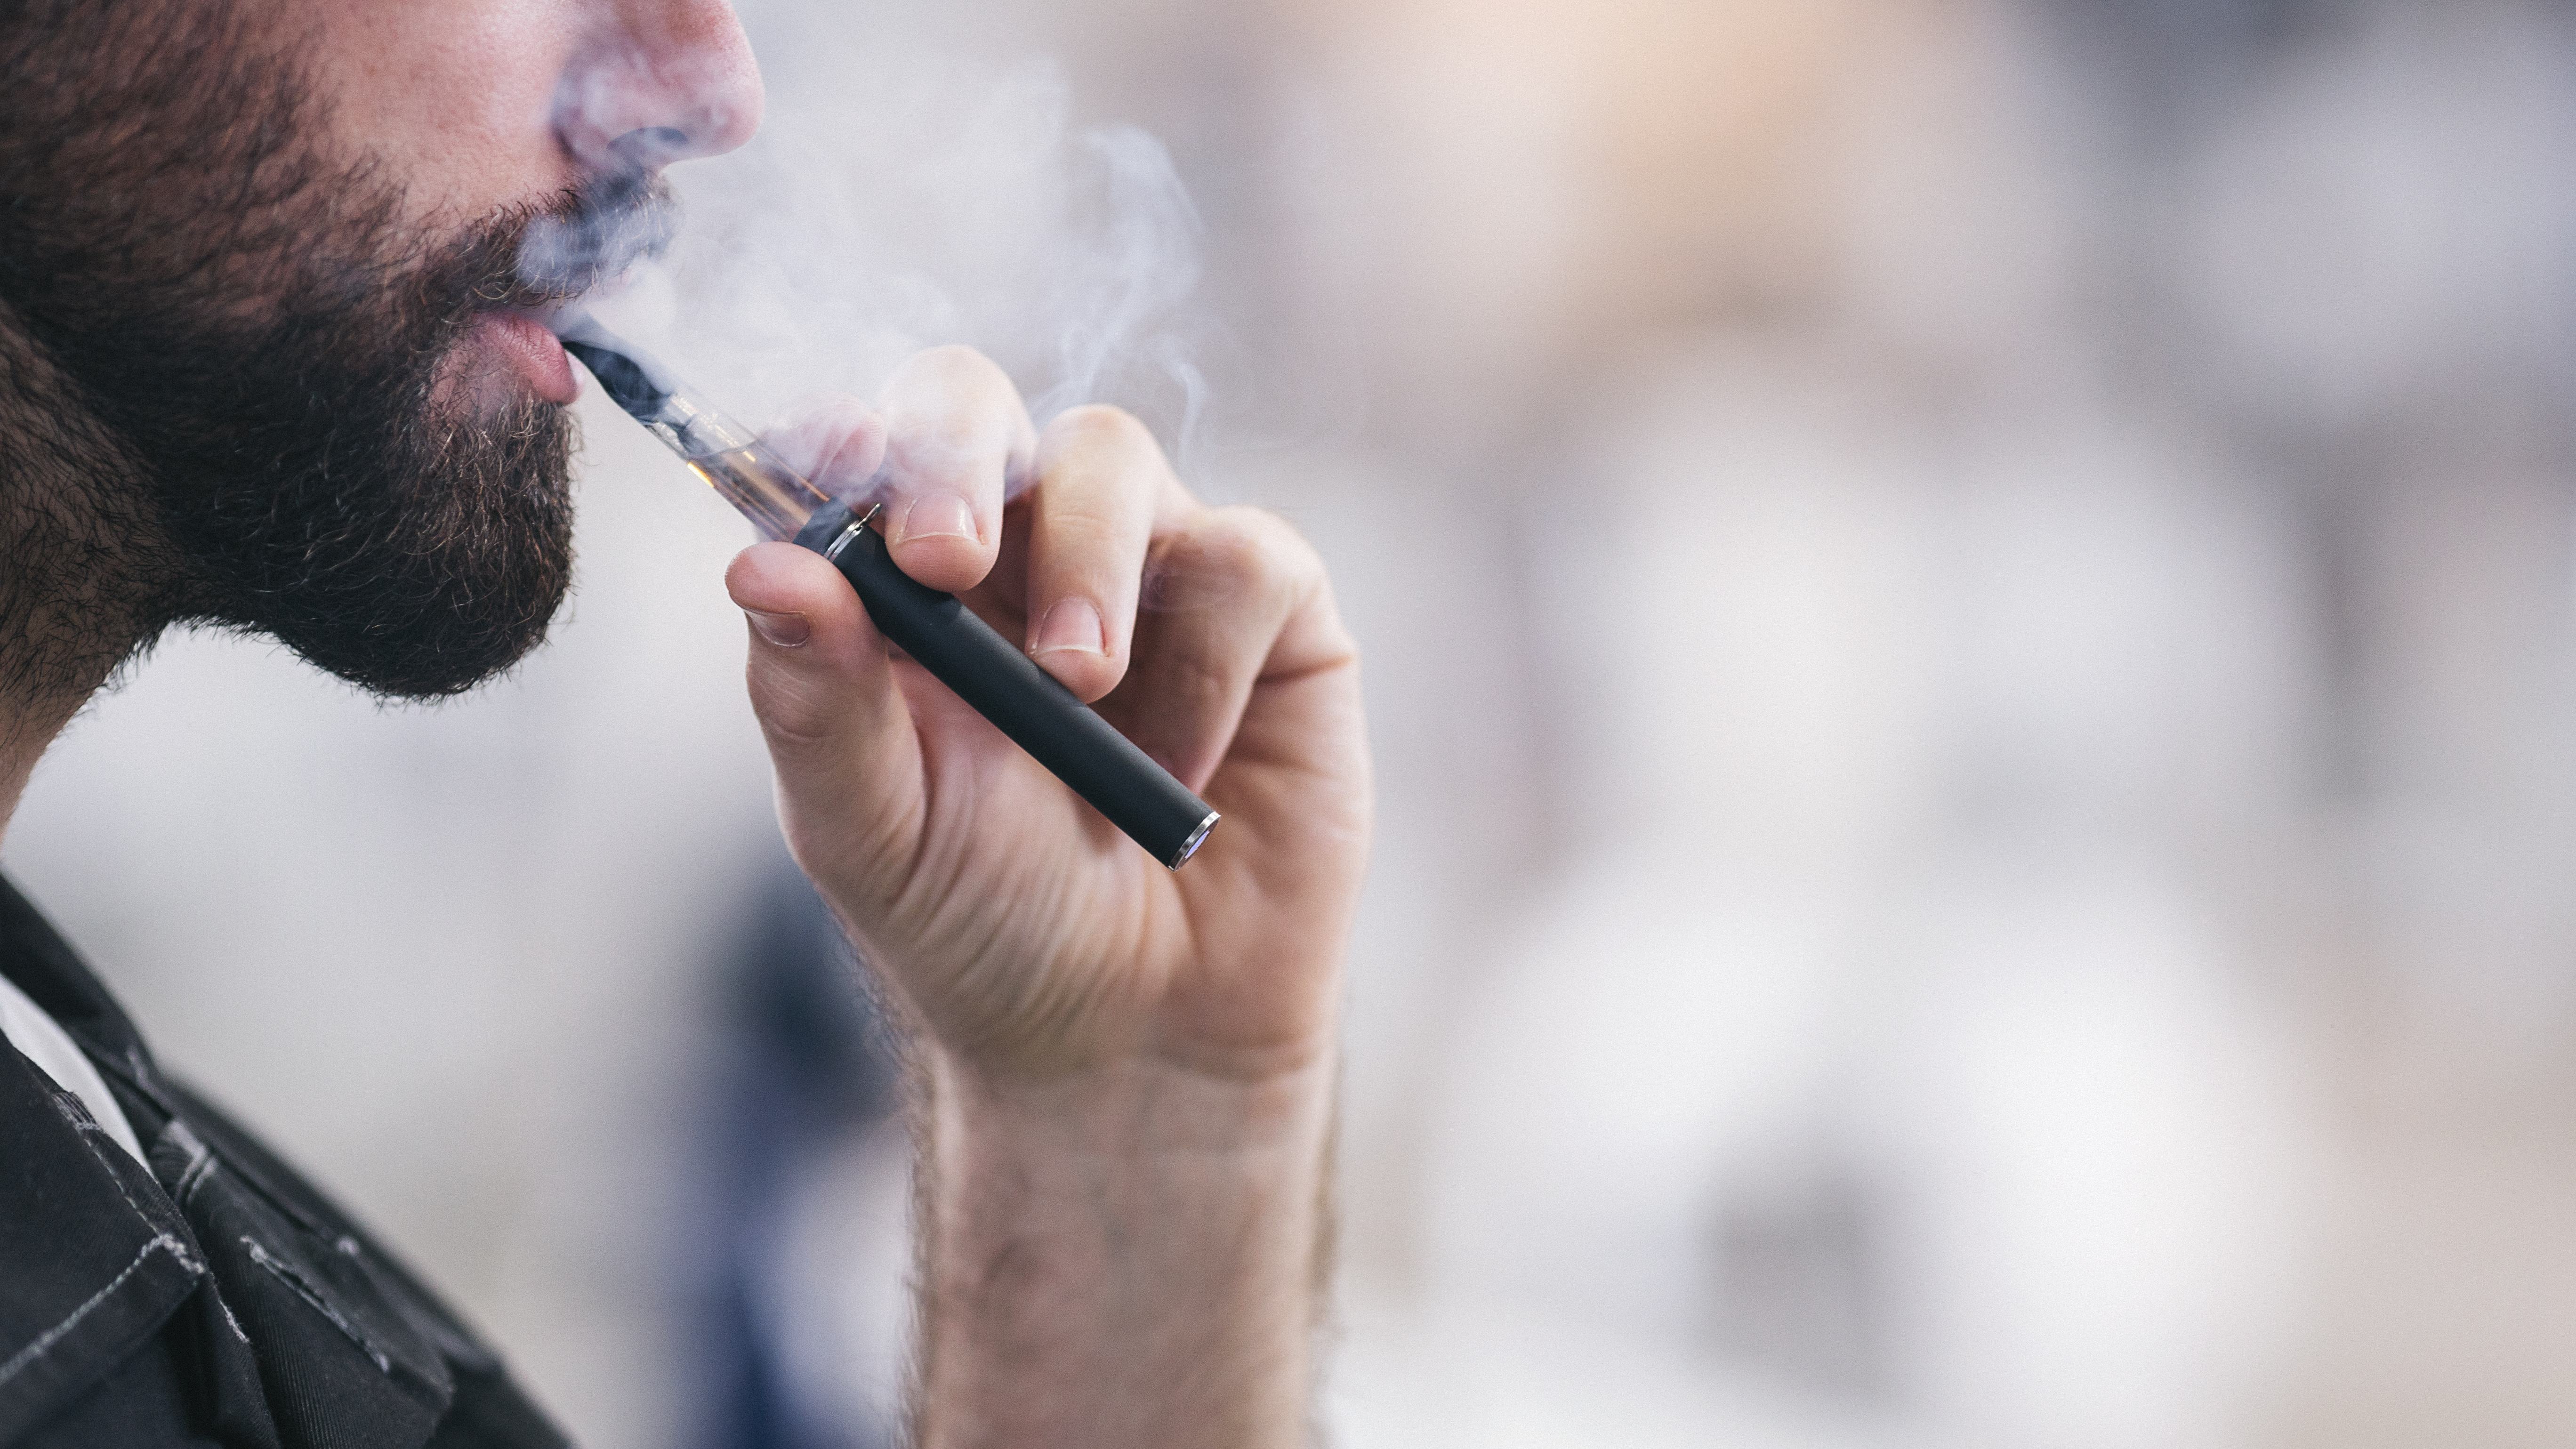 Bearded man taking a puff from vaporizer pen with a cloud of smoke.